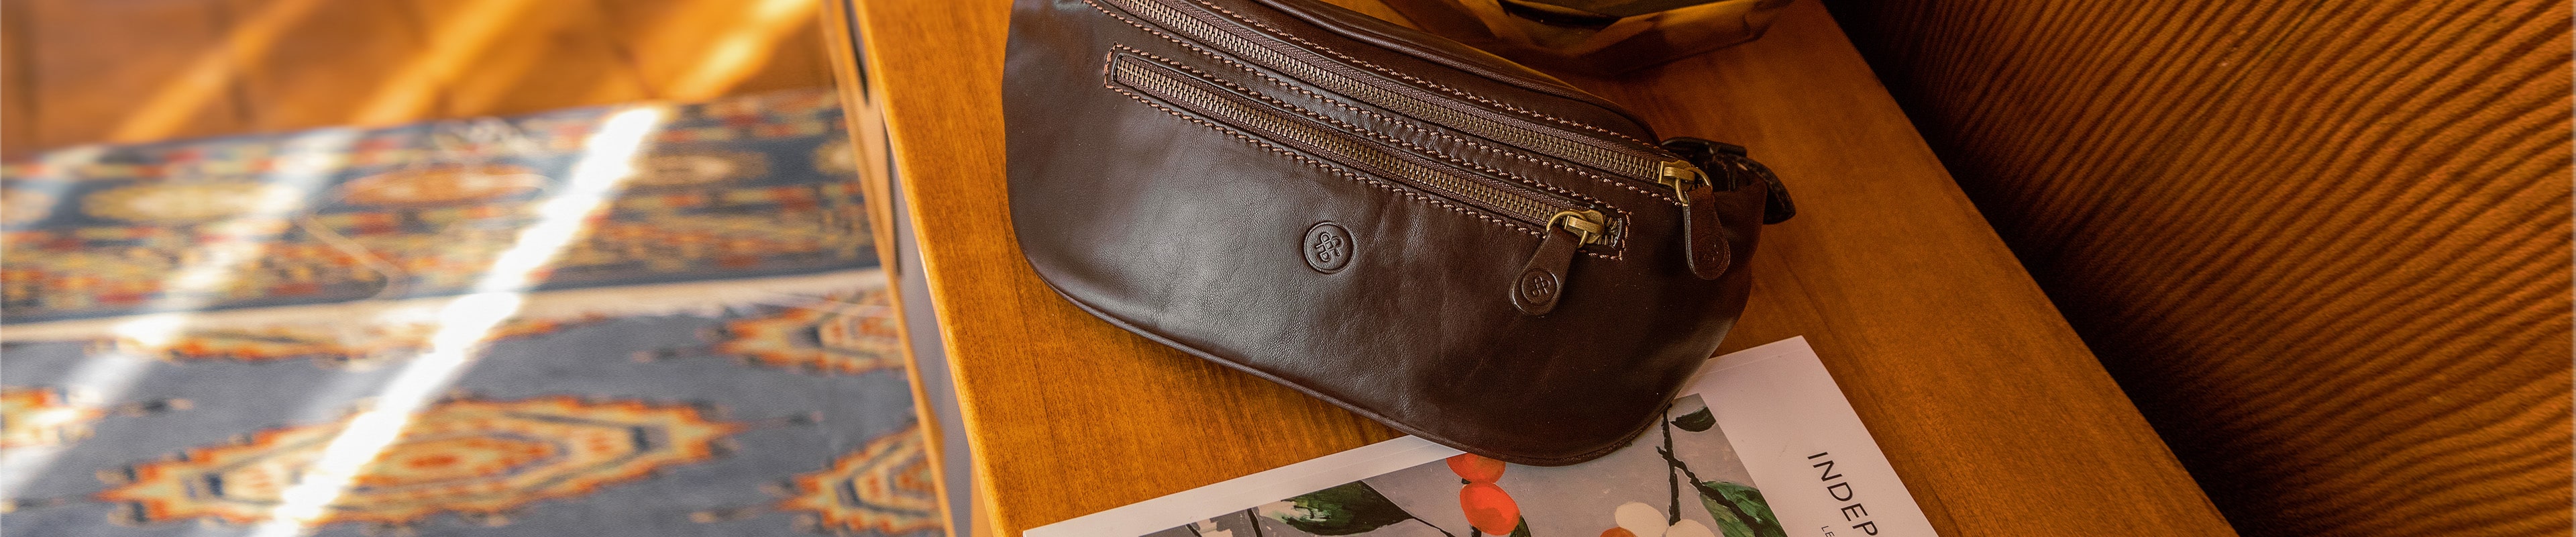 Leather Travel Accessories